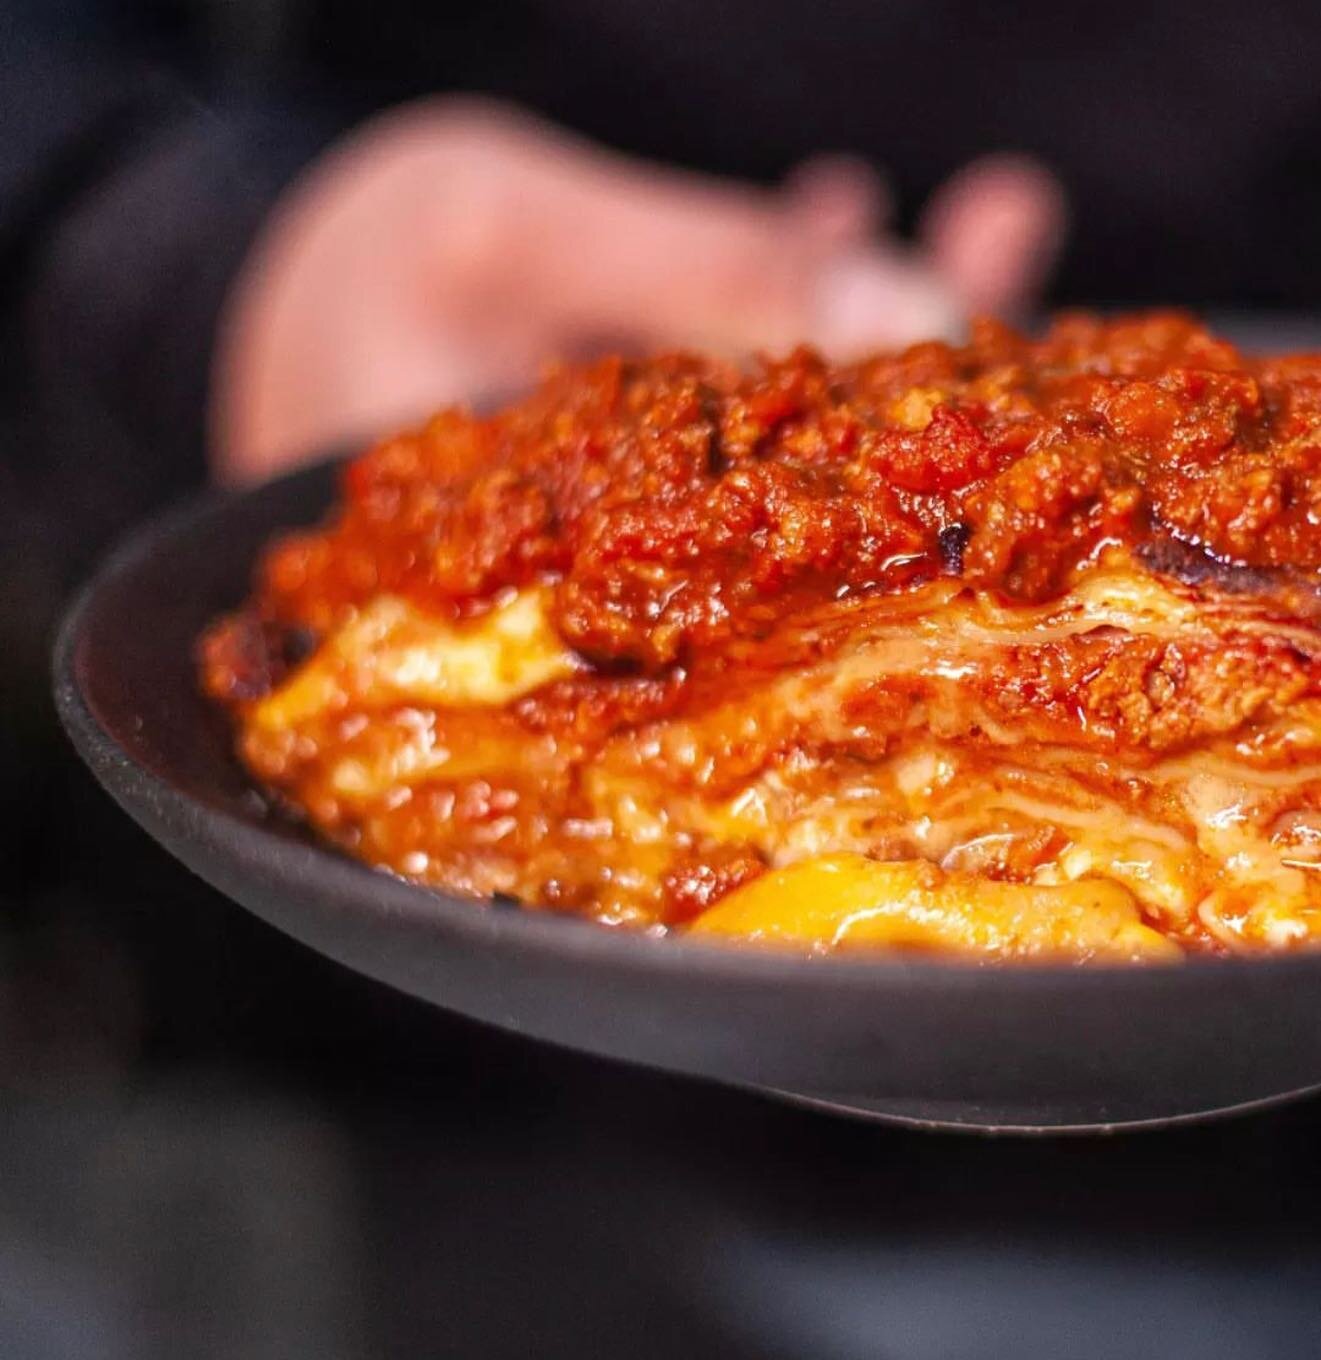 Our homemade lasagne🤌🏽

Whether you dine in or opt for takeaway, we've got you covered. You can also find us on Uber Eats, Menulog and DoorDash for convenient delivery.

We're open every day from 12 PM to 9 PM 
📍6 Bluff Road, Black Rock, Victoria.